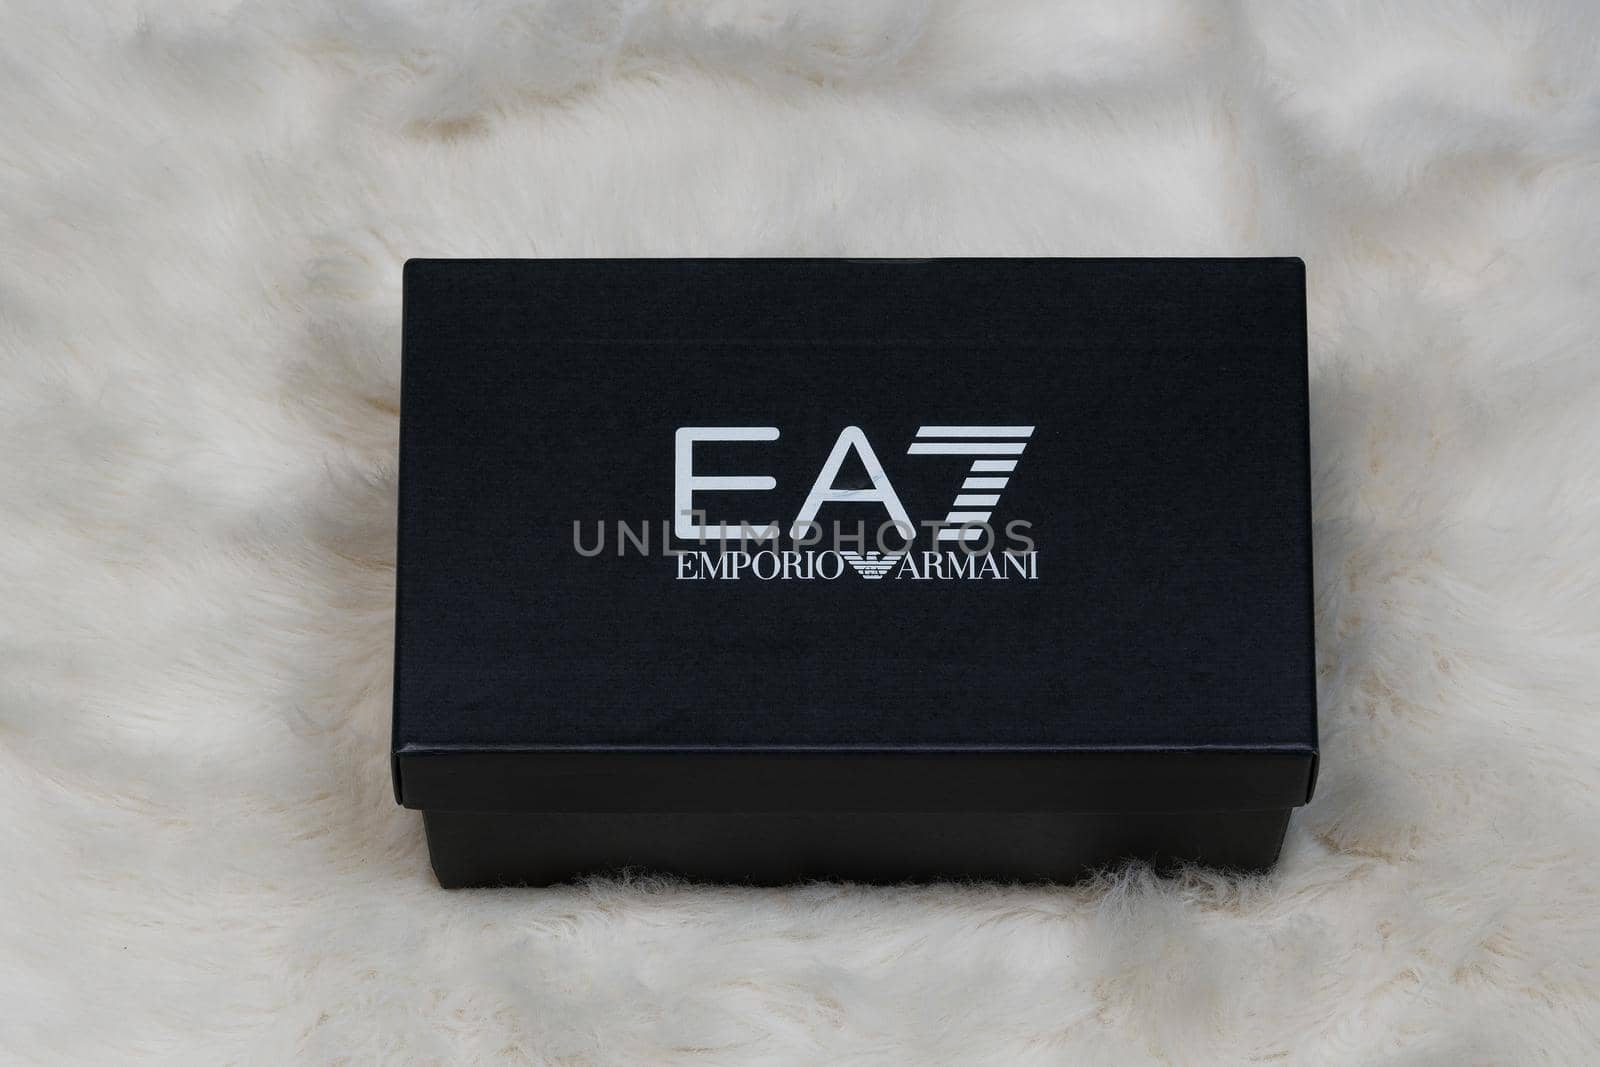 Emporio Armani online delivery box. by bestravelvideo